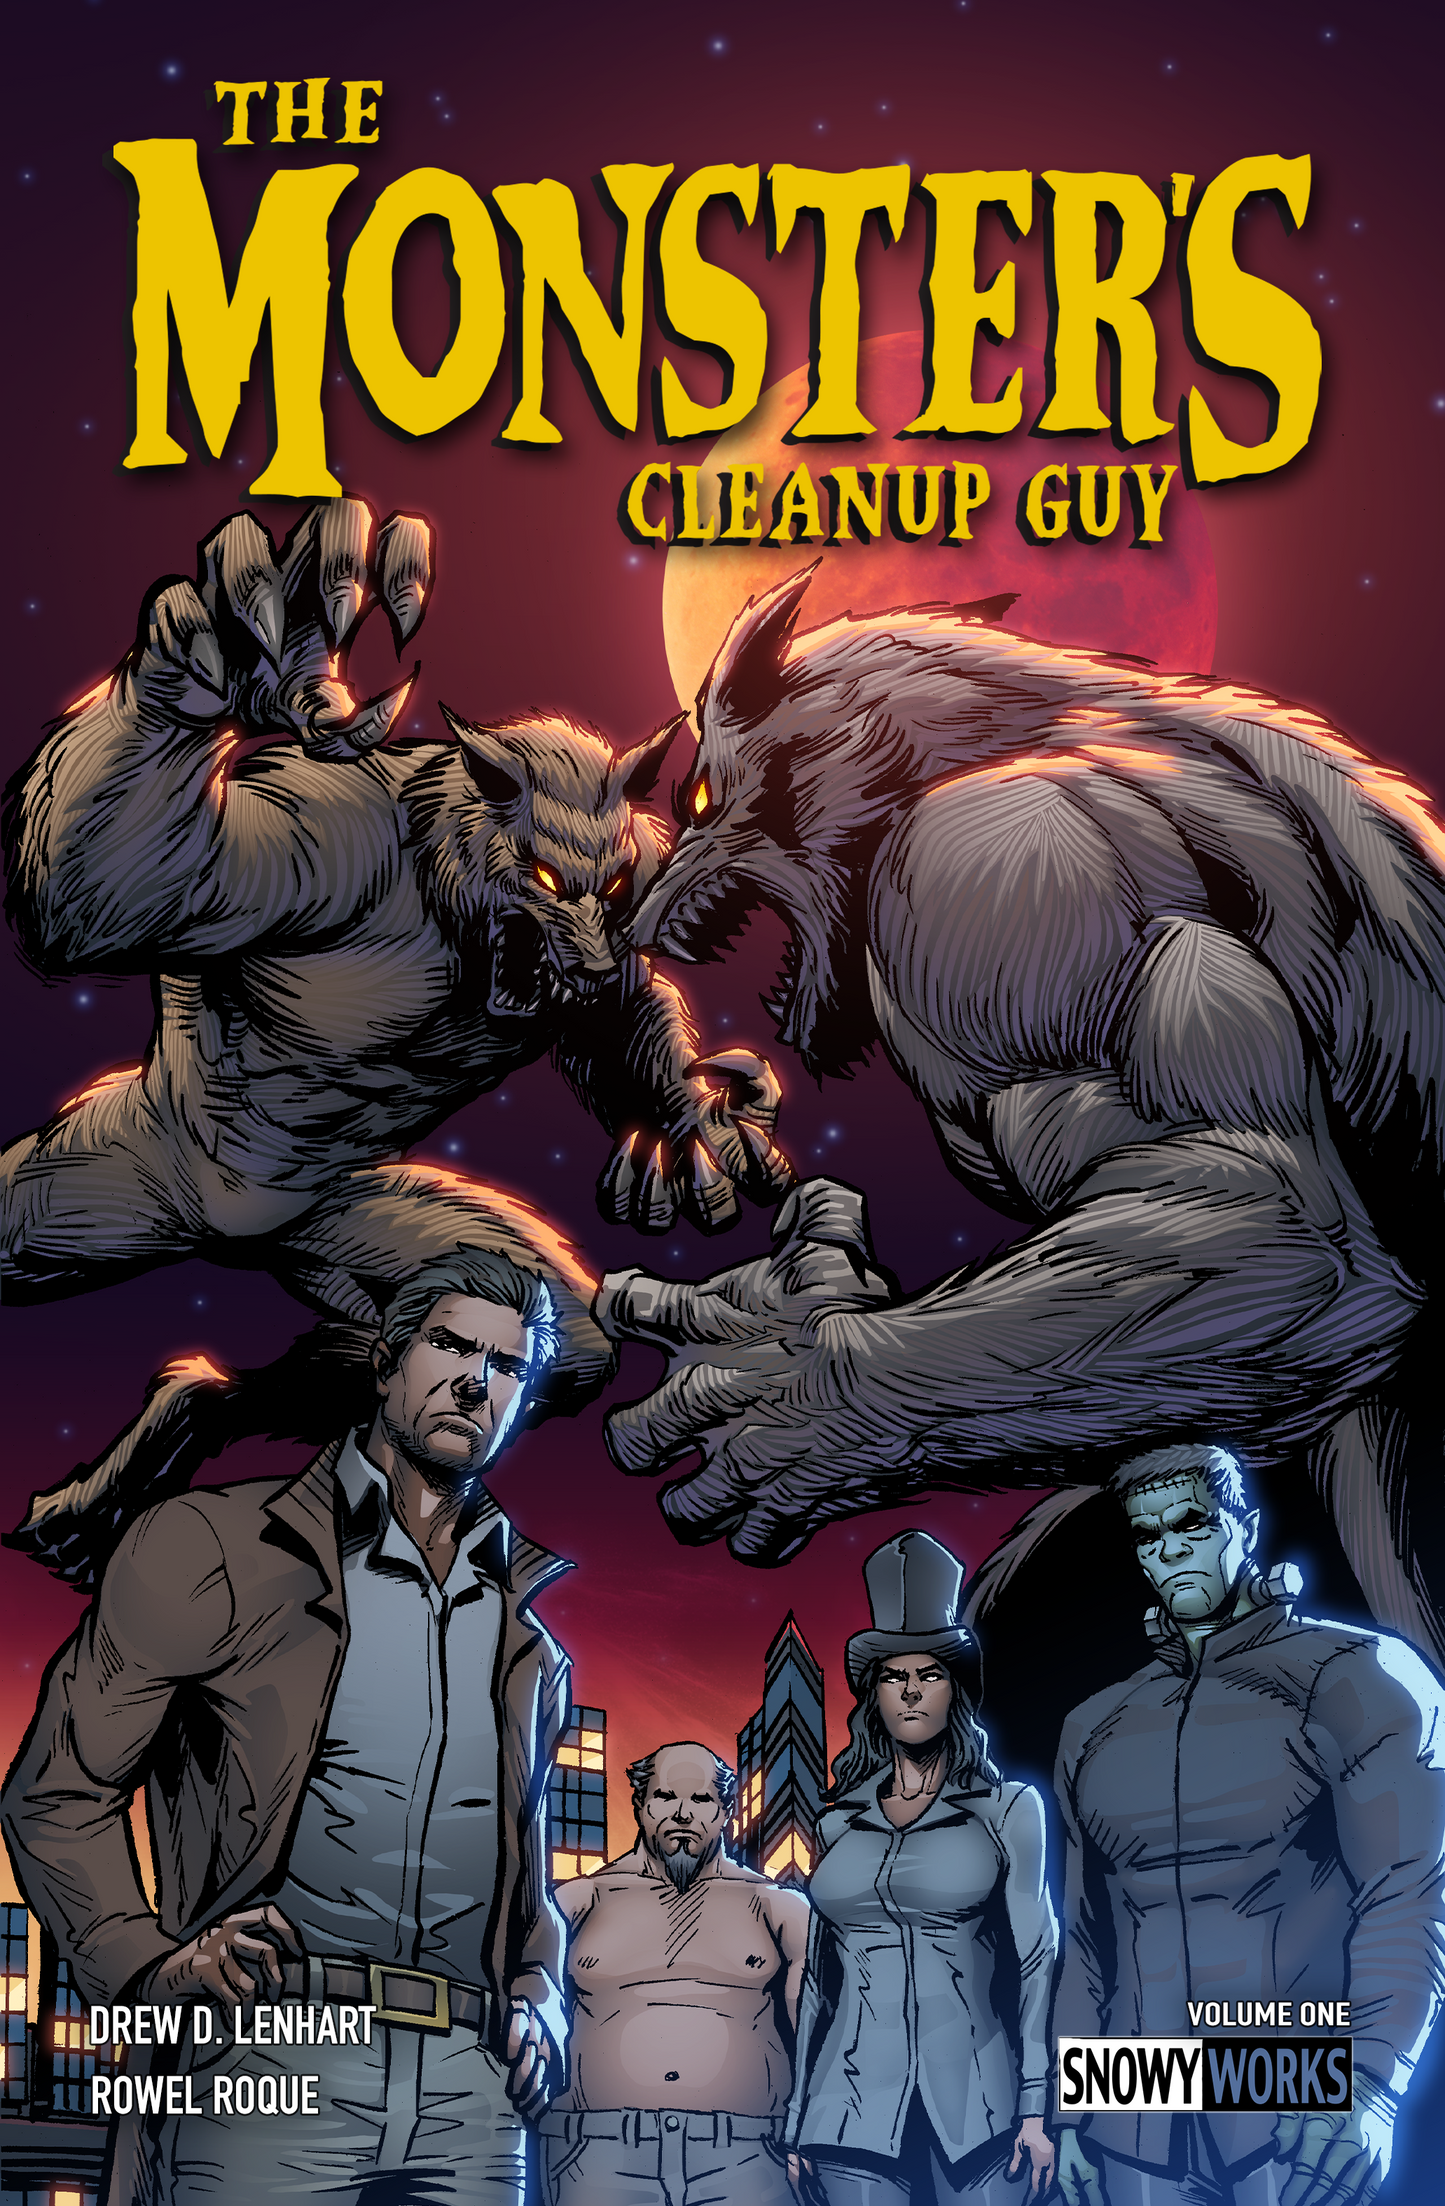 The Monster's Cleanup Guy